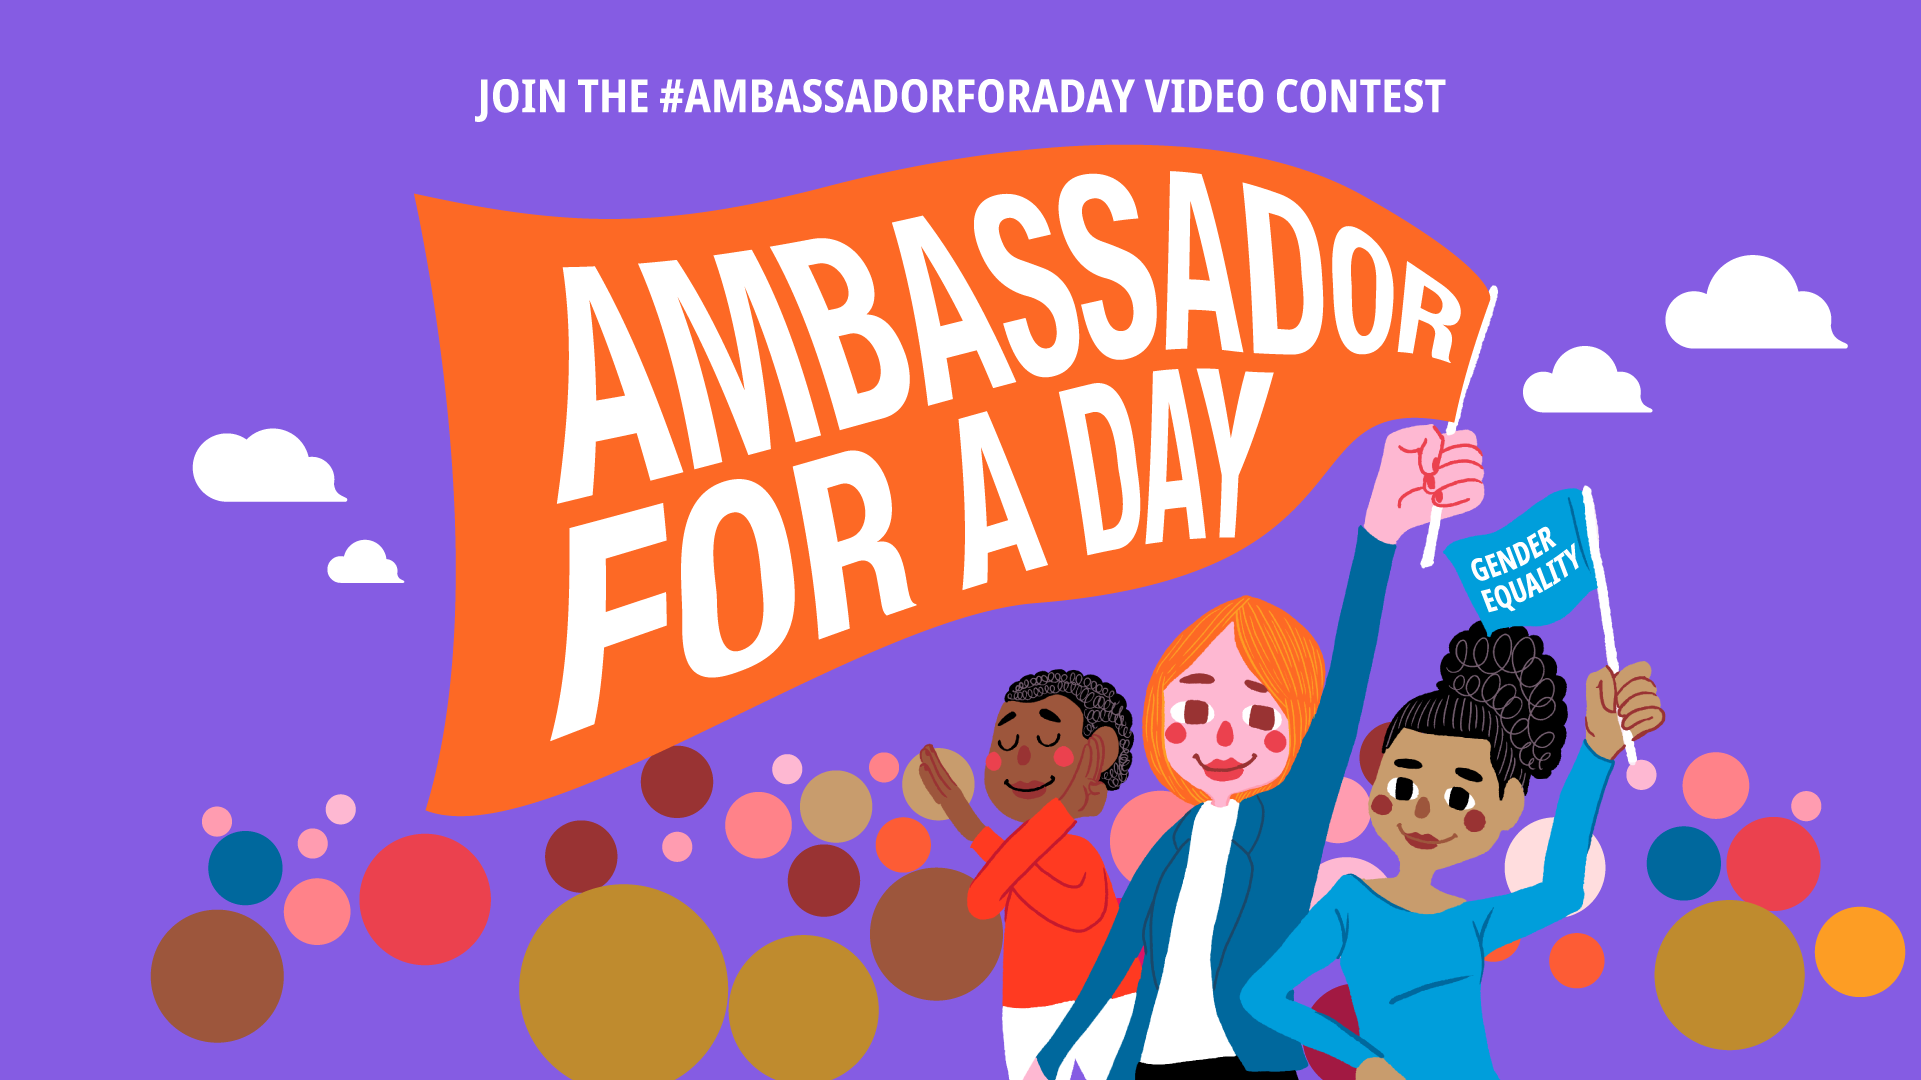 Youth are the voice of the future! Be an Ambassador for a day — Youth Ambassador!